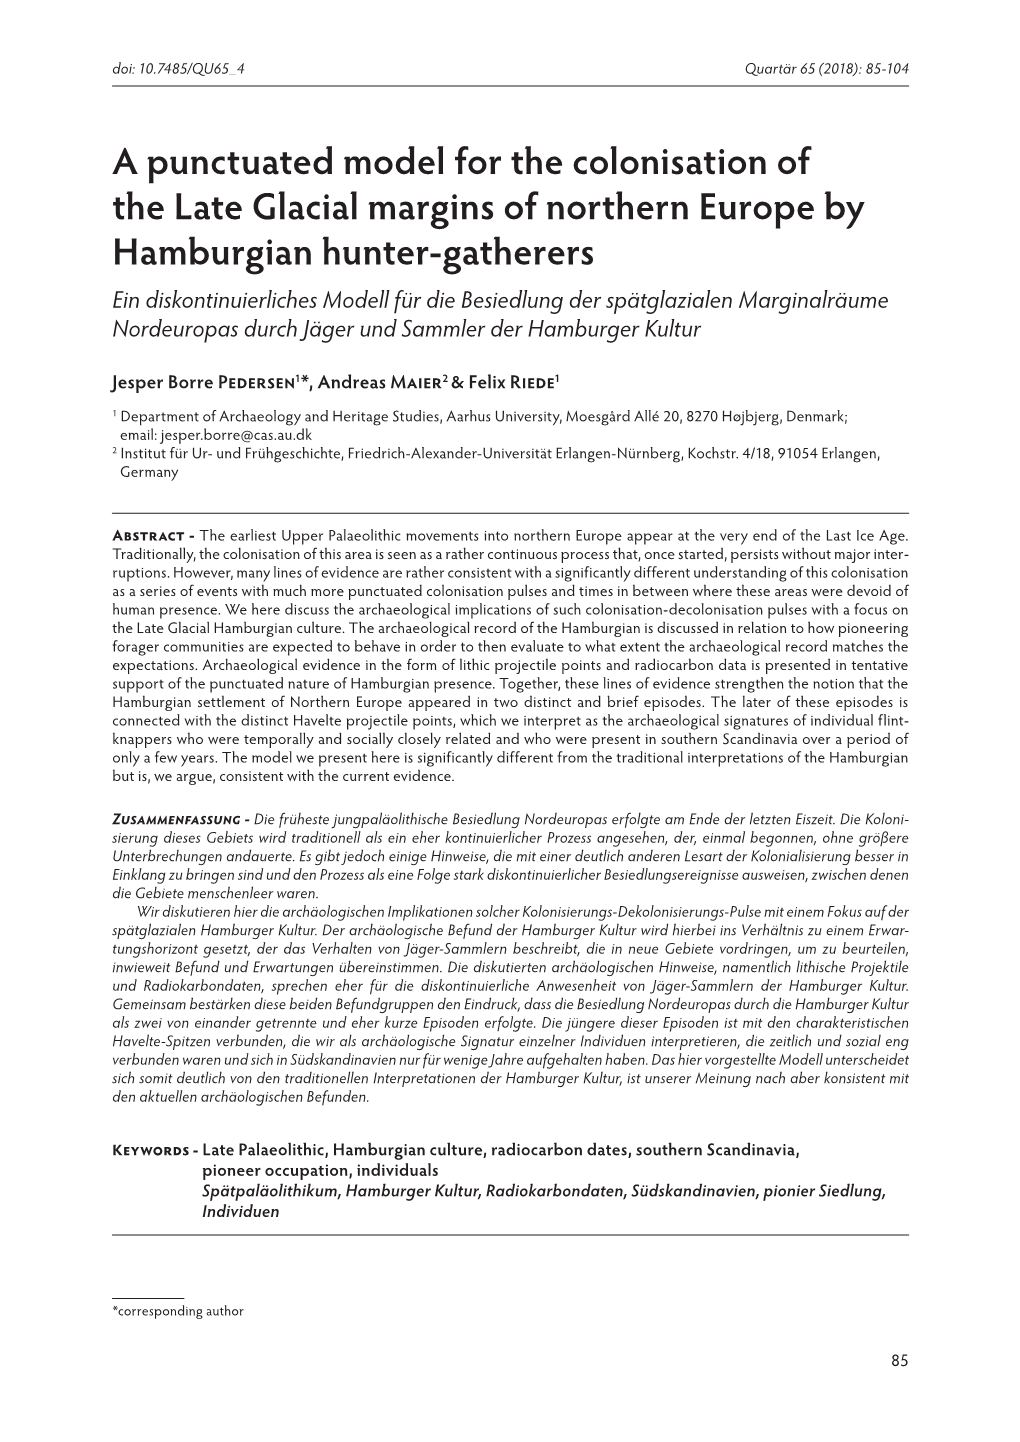 A Punctuated Model for the Colonisation of the Late Glacial Margins of Northern Europe by Hamburgian Hunter-Gatherers